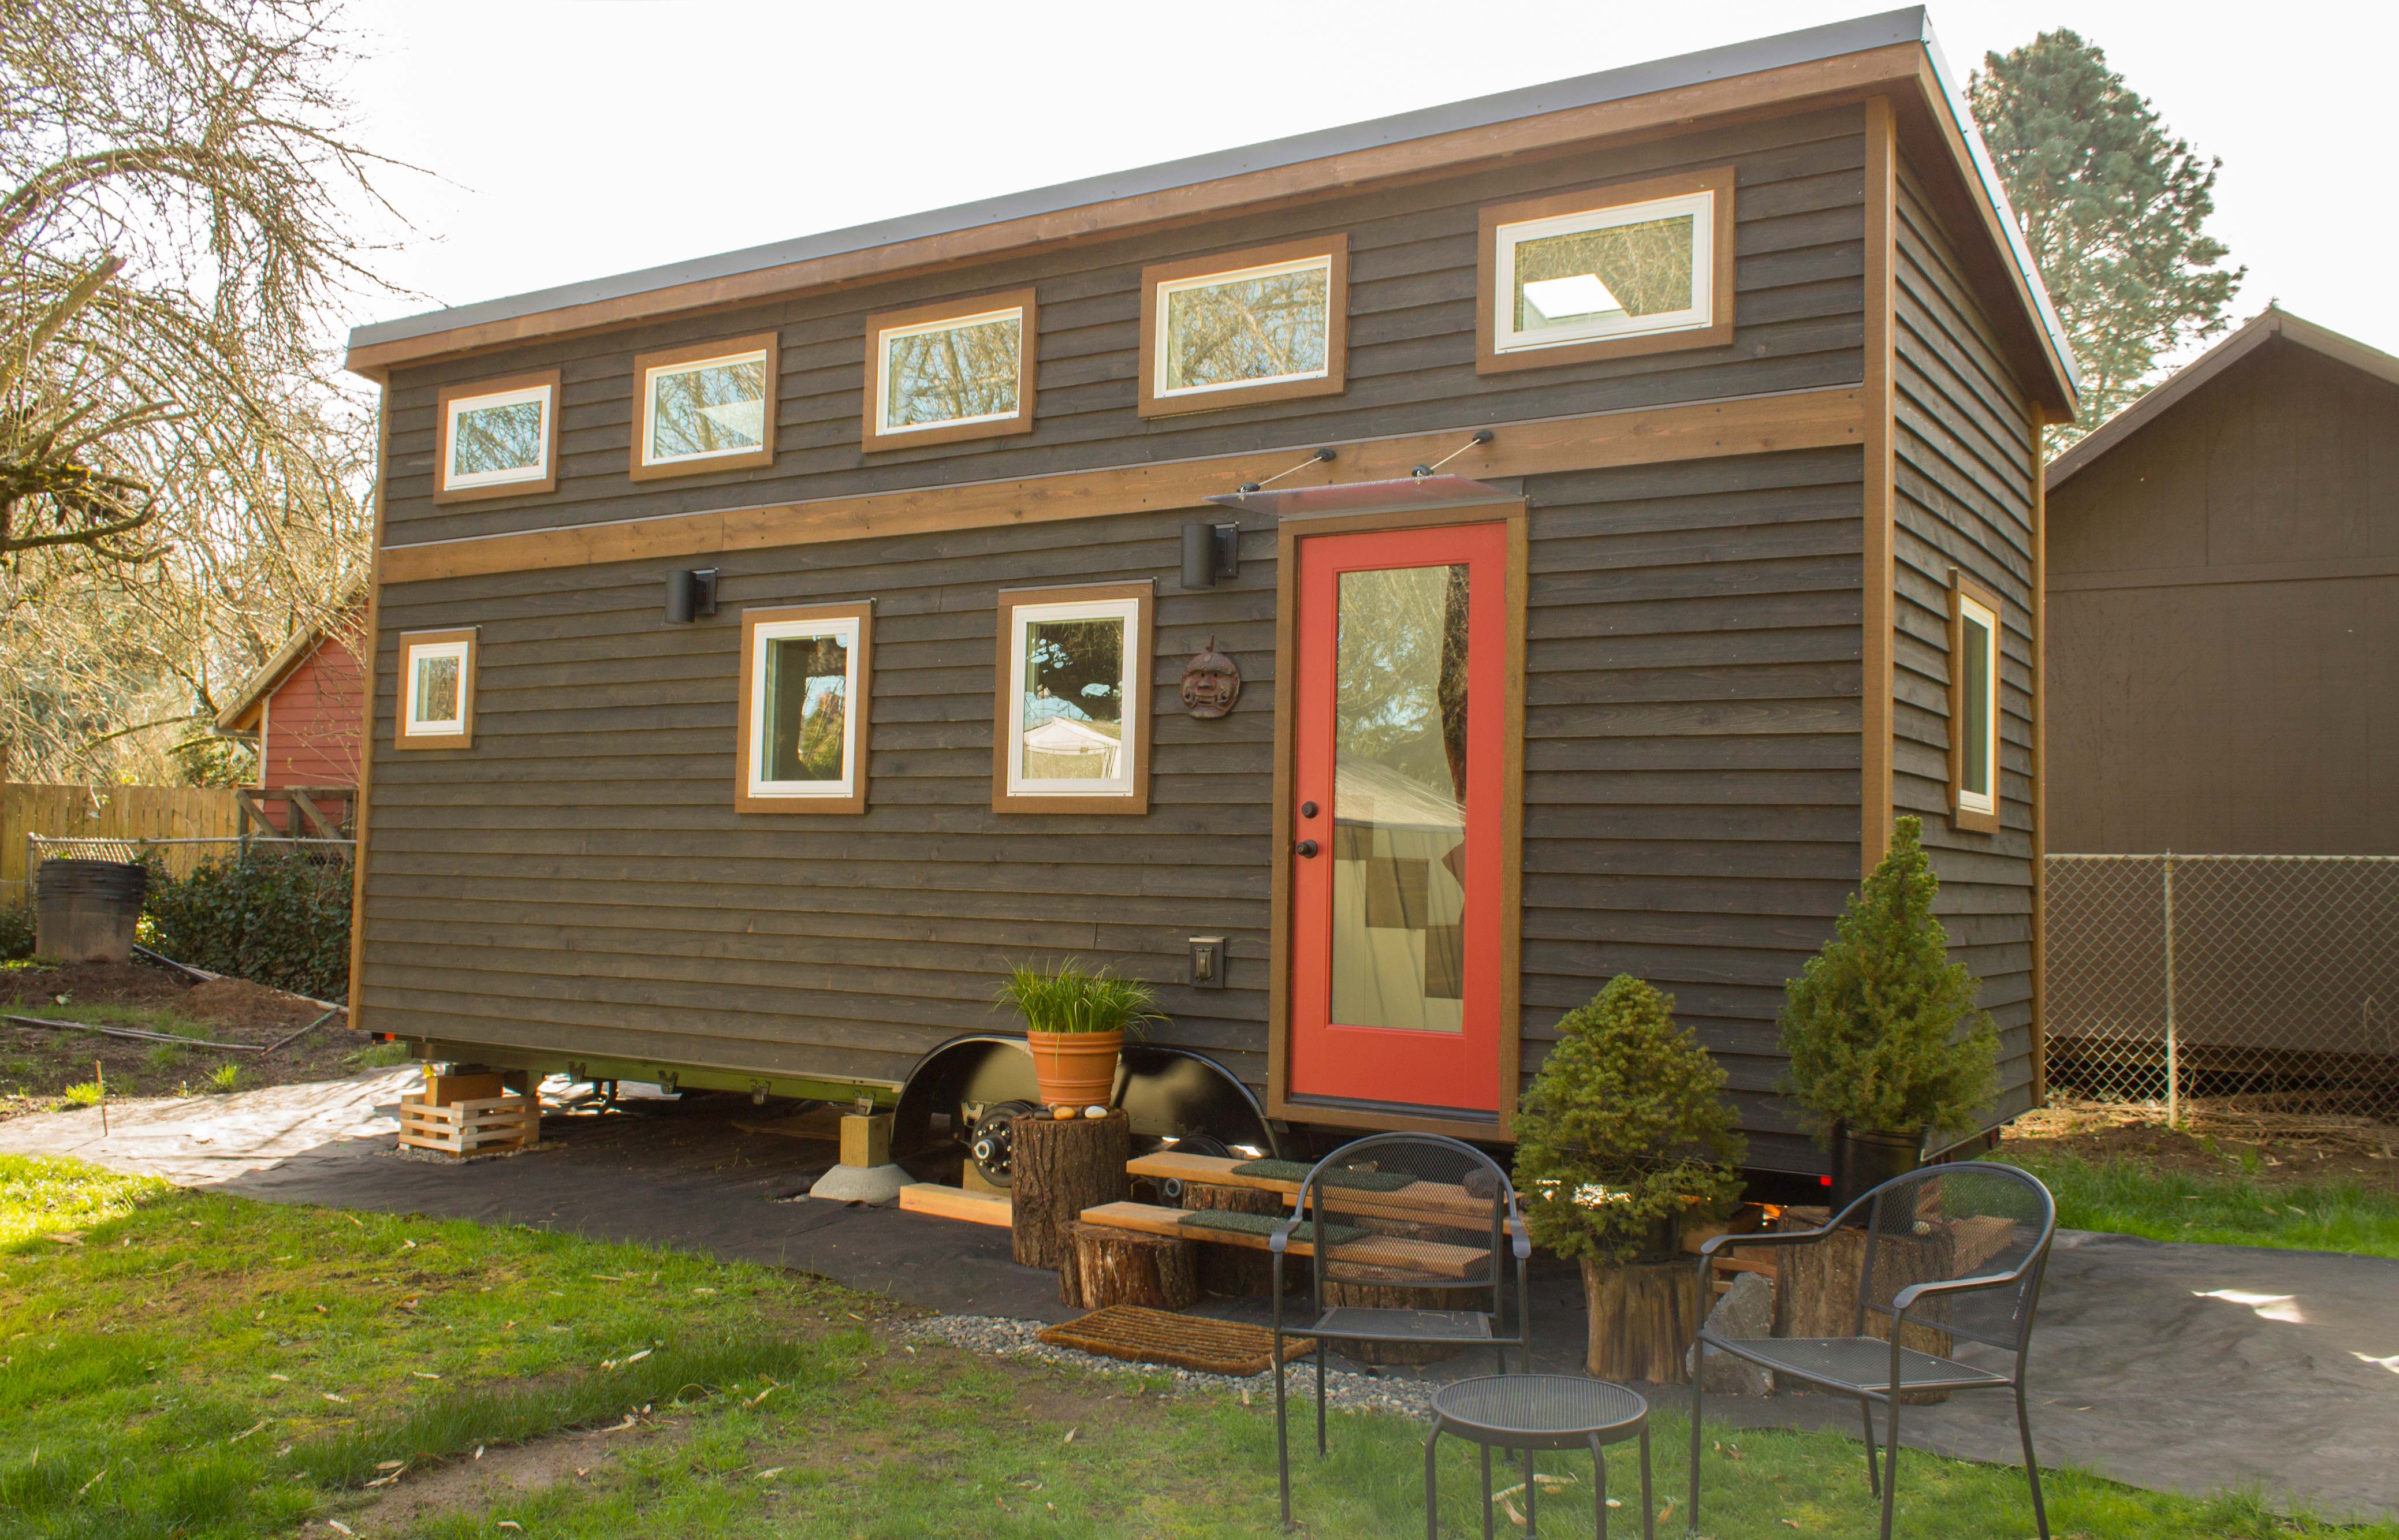 The Hikari Box Tiny House: A Modern Tiny House Design by Shelter Wise, who shares their tips for buying a tiny house on wheels